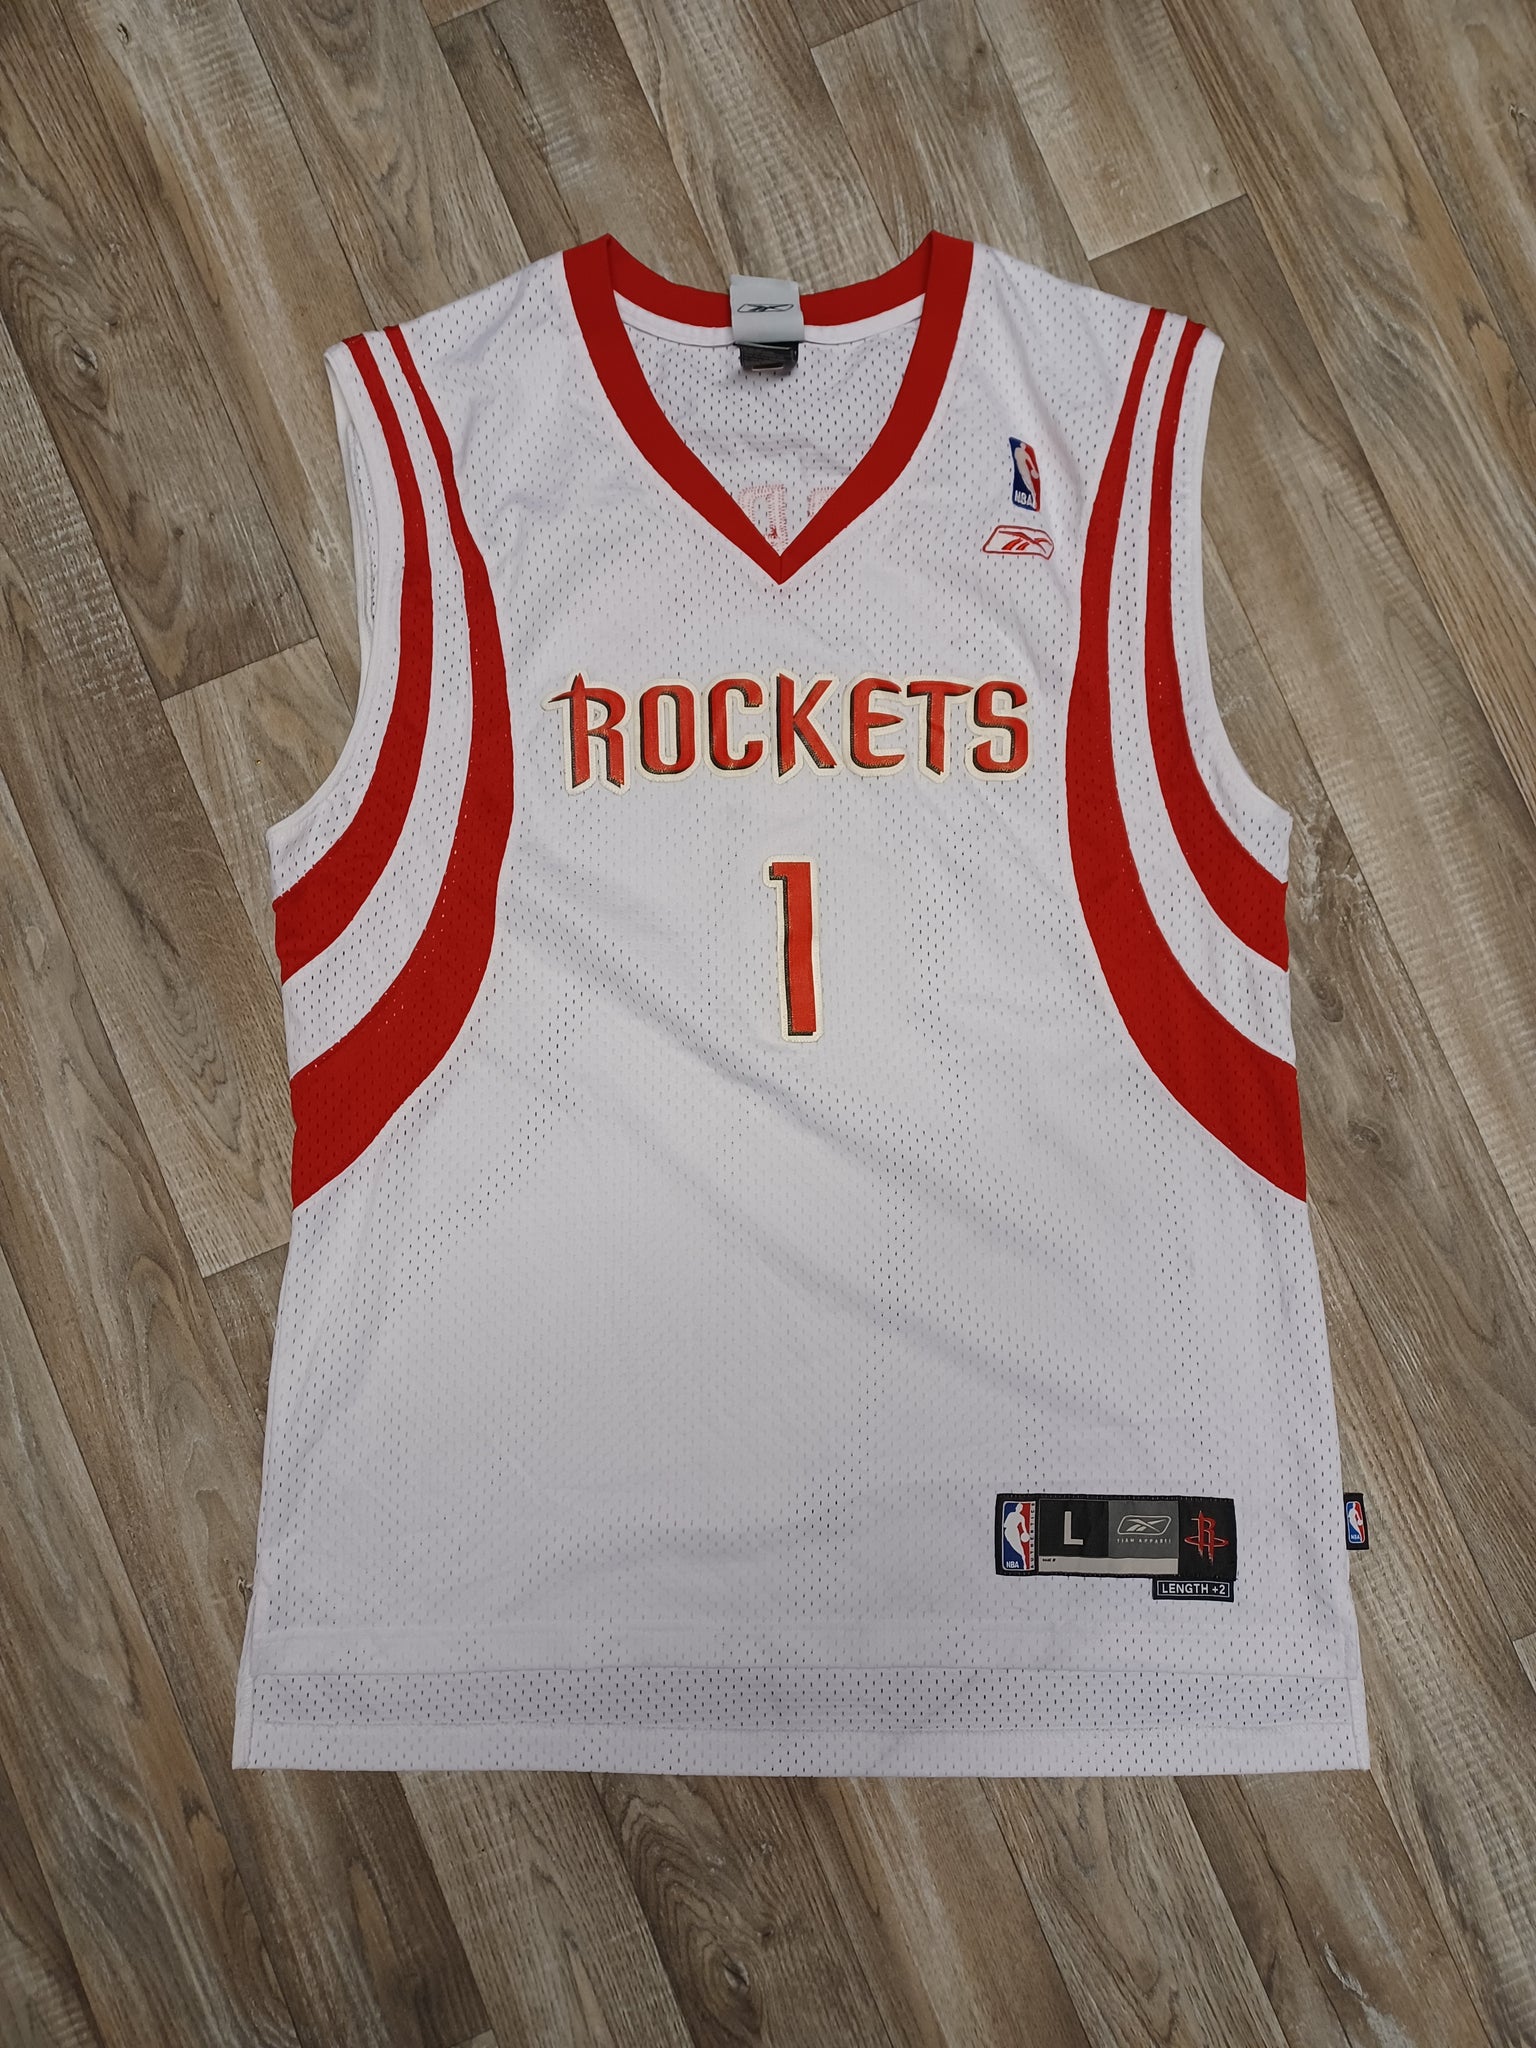 🏀 Tracy McGrady Houston Rockets Jersey Size Large – The Throwback